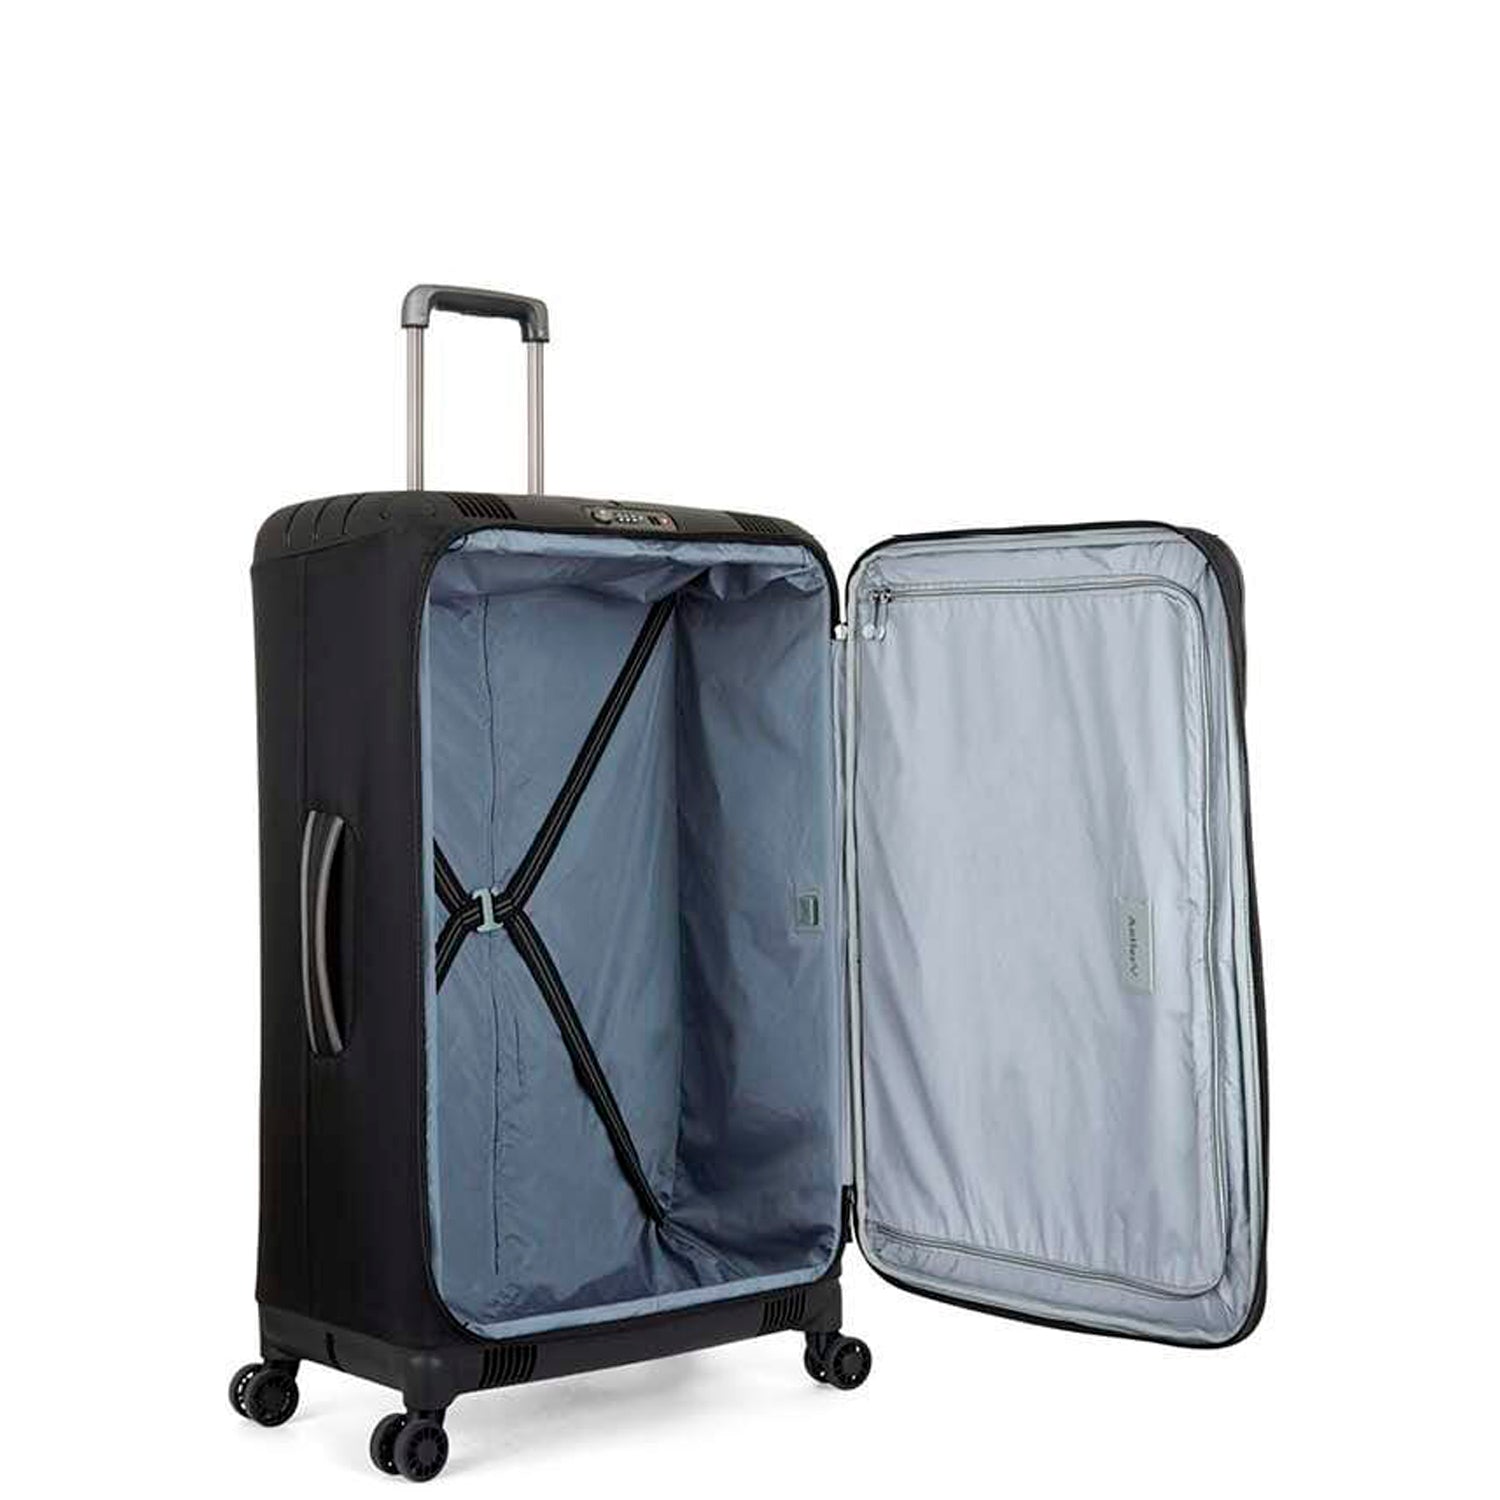 Antler Titus Collection Suitcase-Large Check In Black/Navy